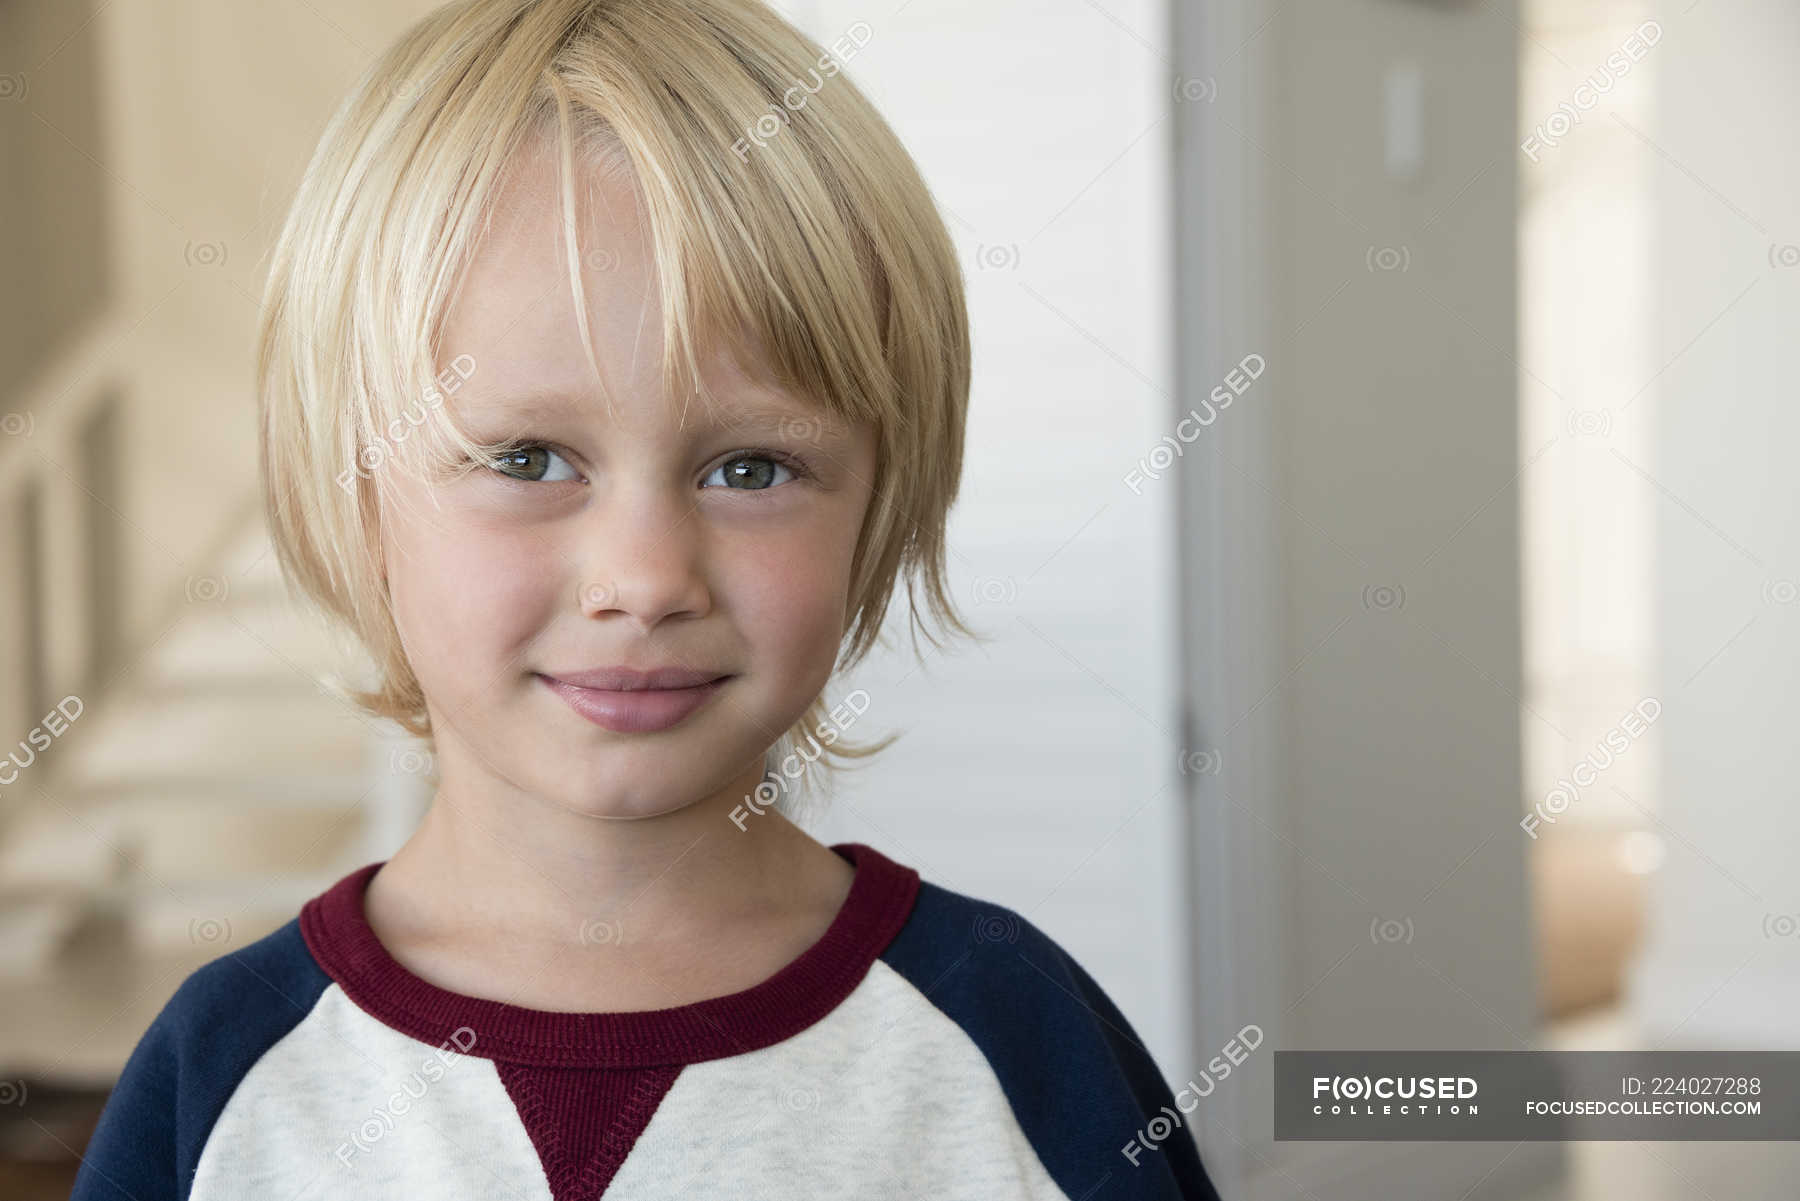 4. Blonde Boy with Short Haircut - wide 3